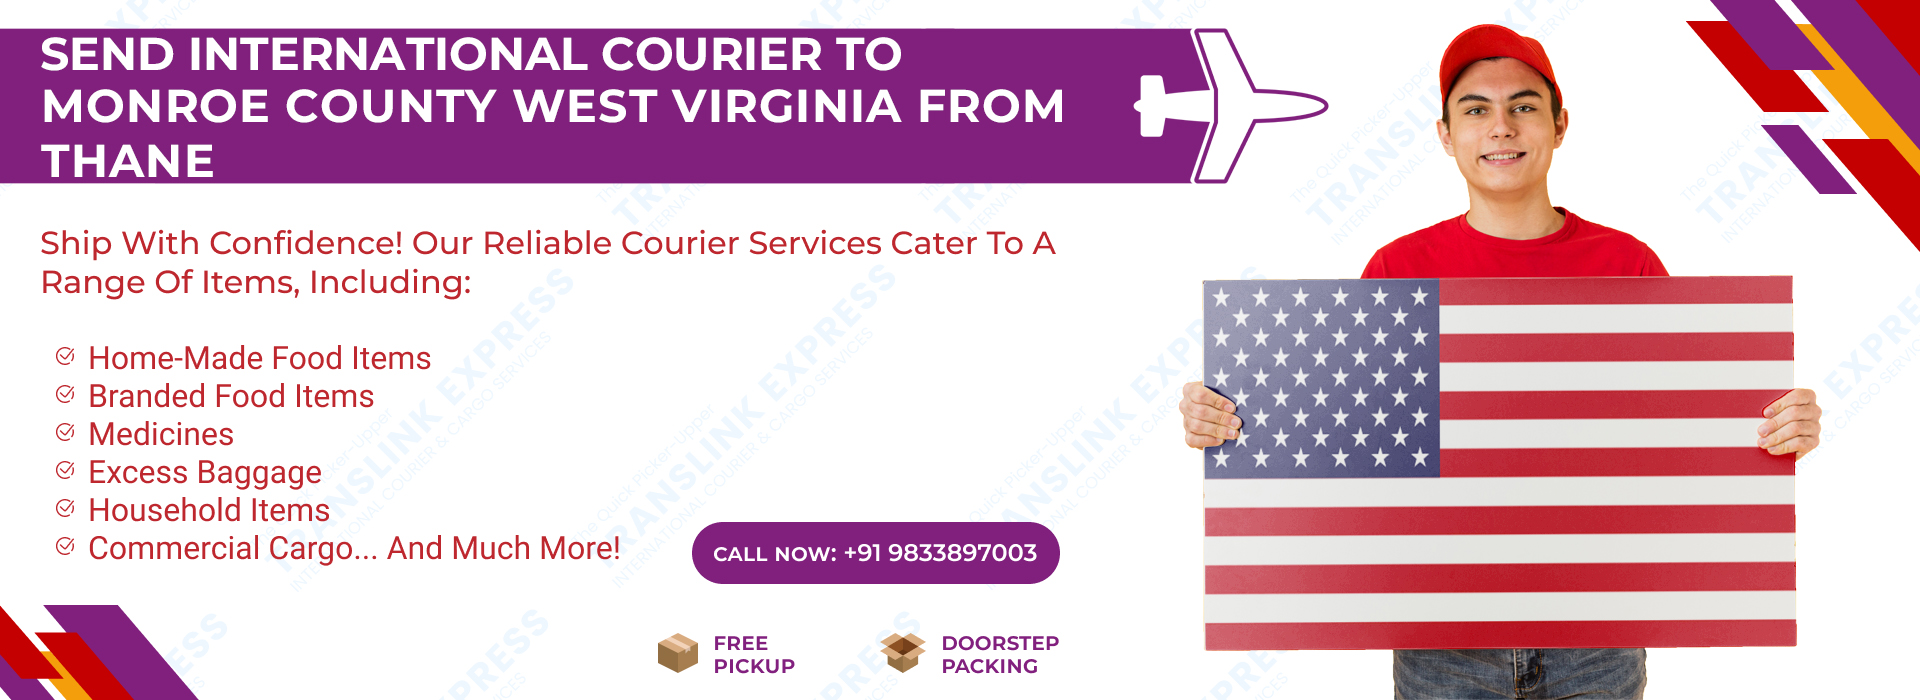 Courier to Monroe County West Virginia From Thane